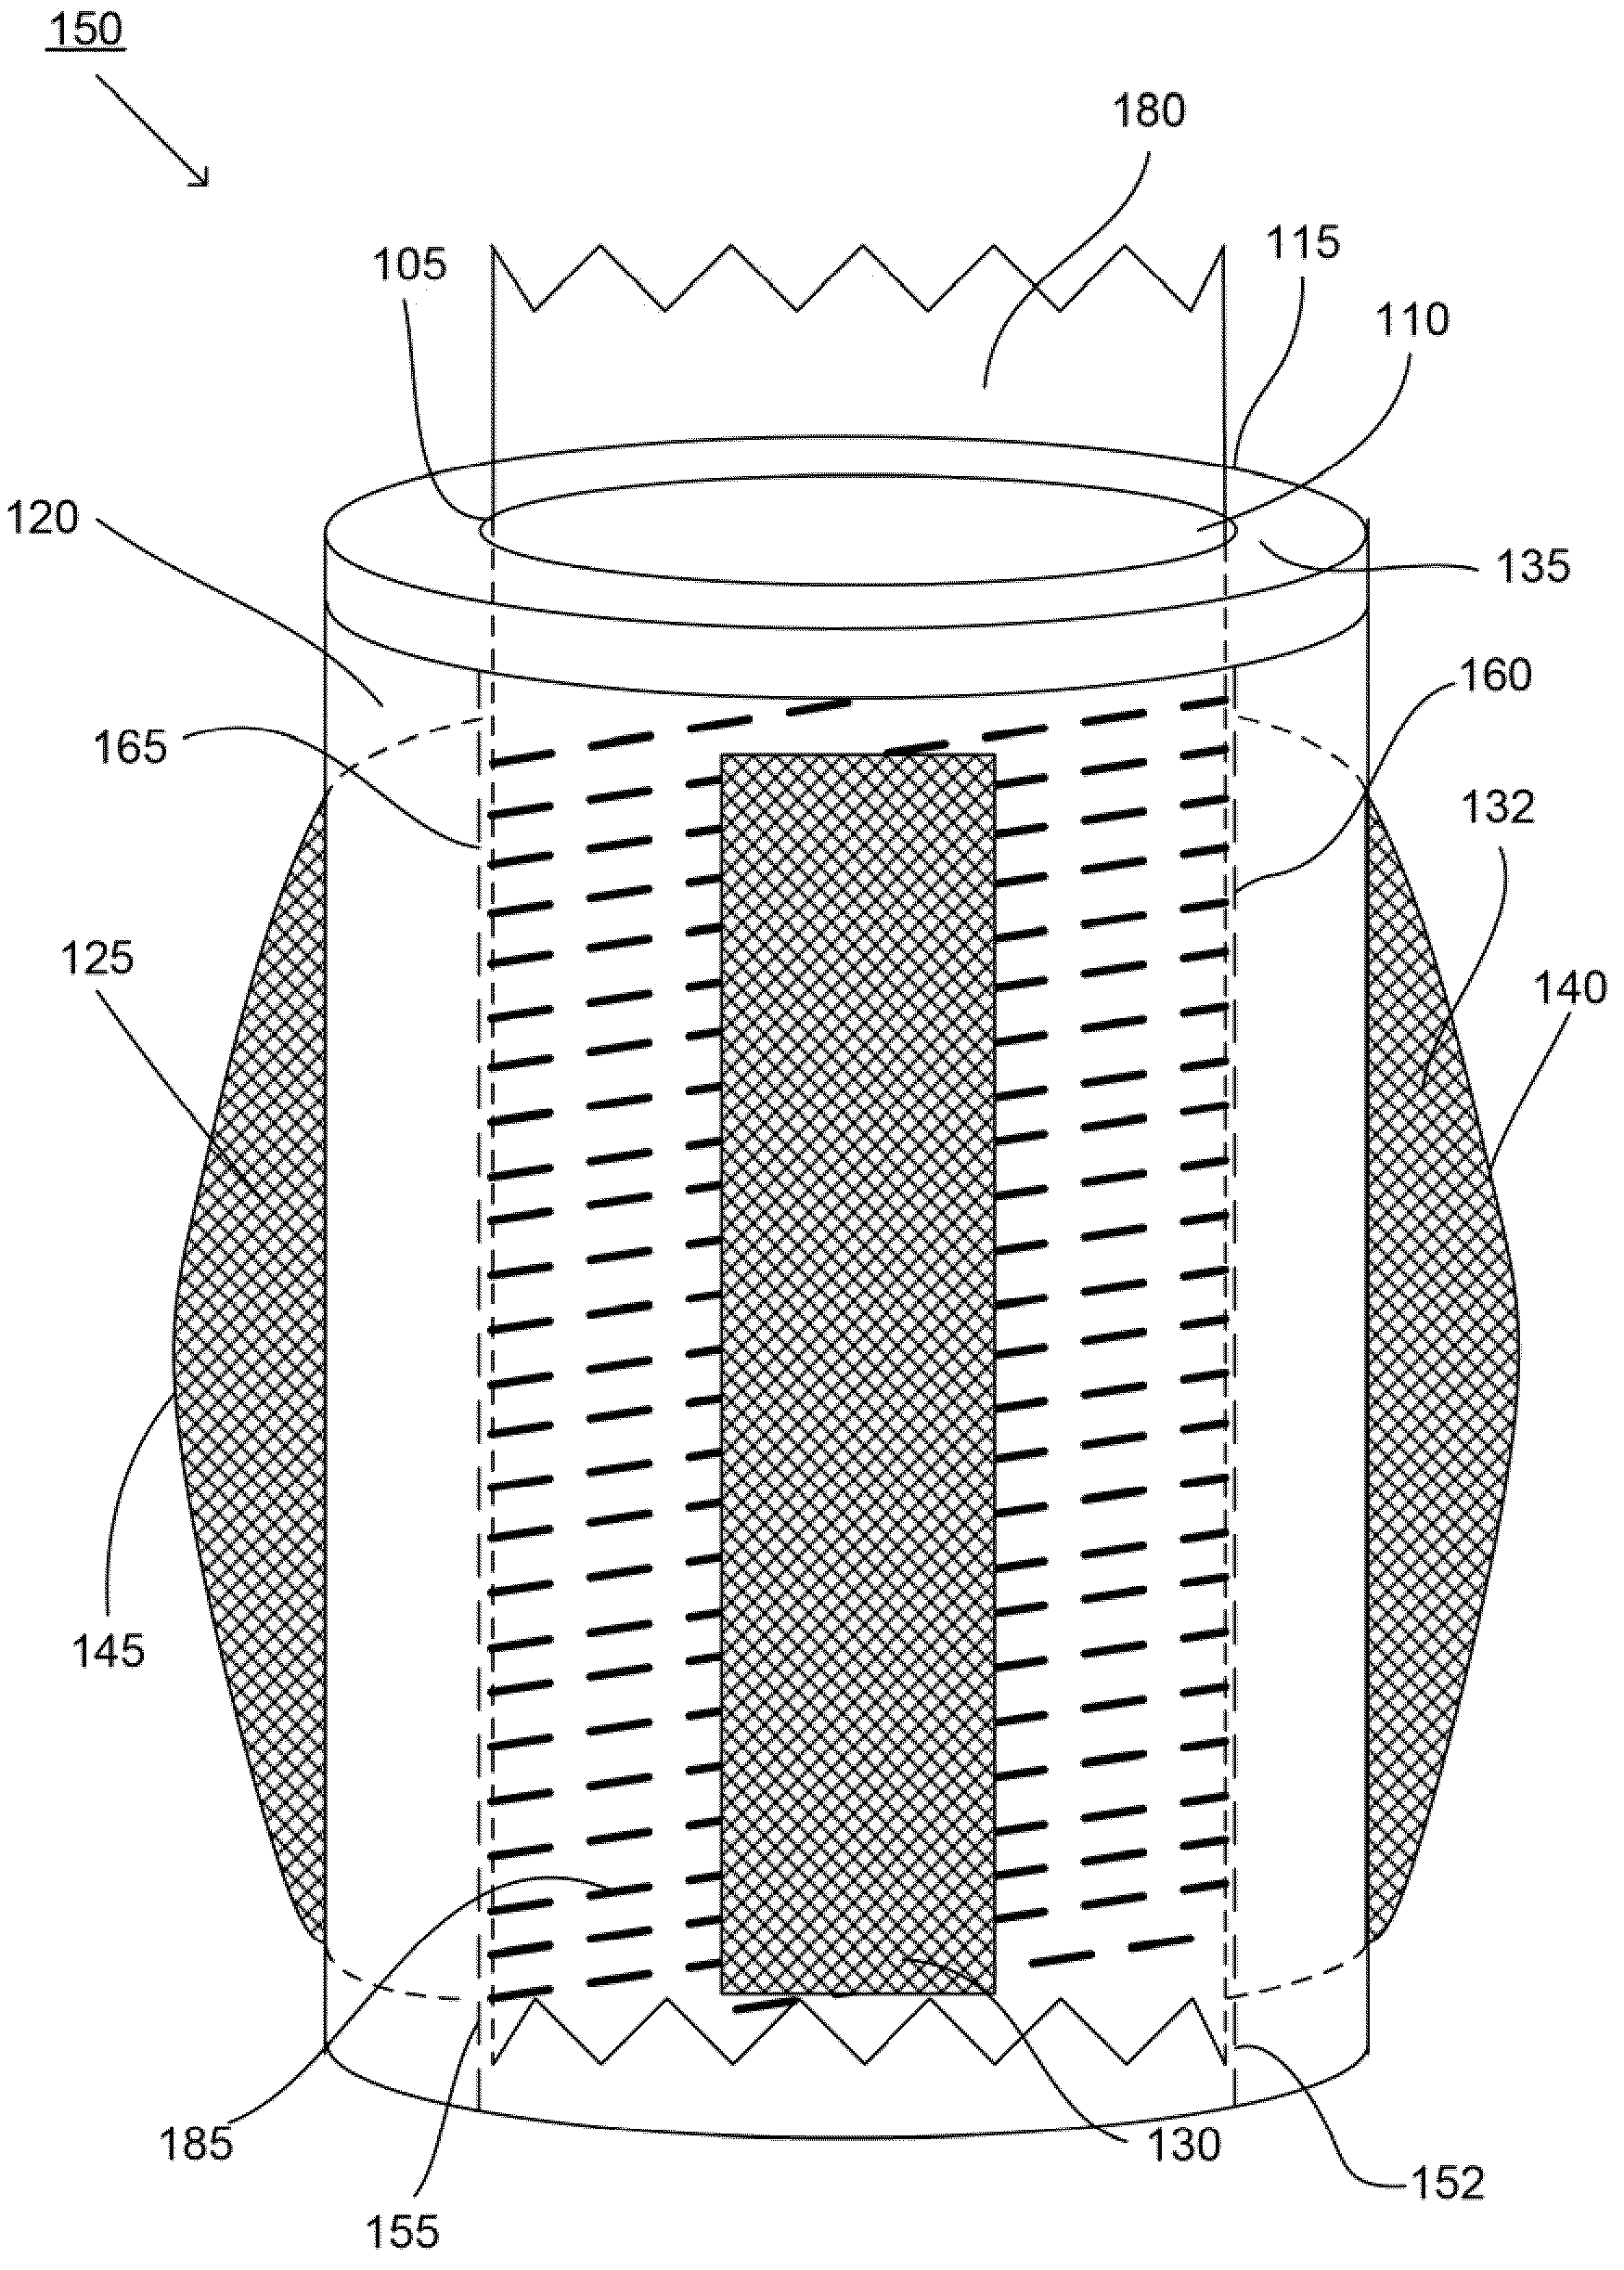 Systems and methods for the medical treatment of structural tissue